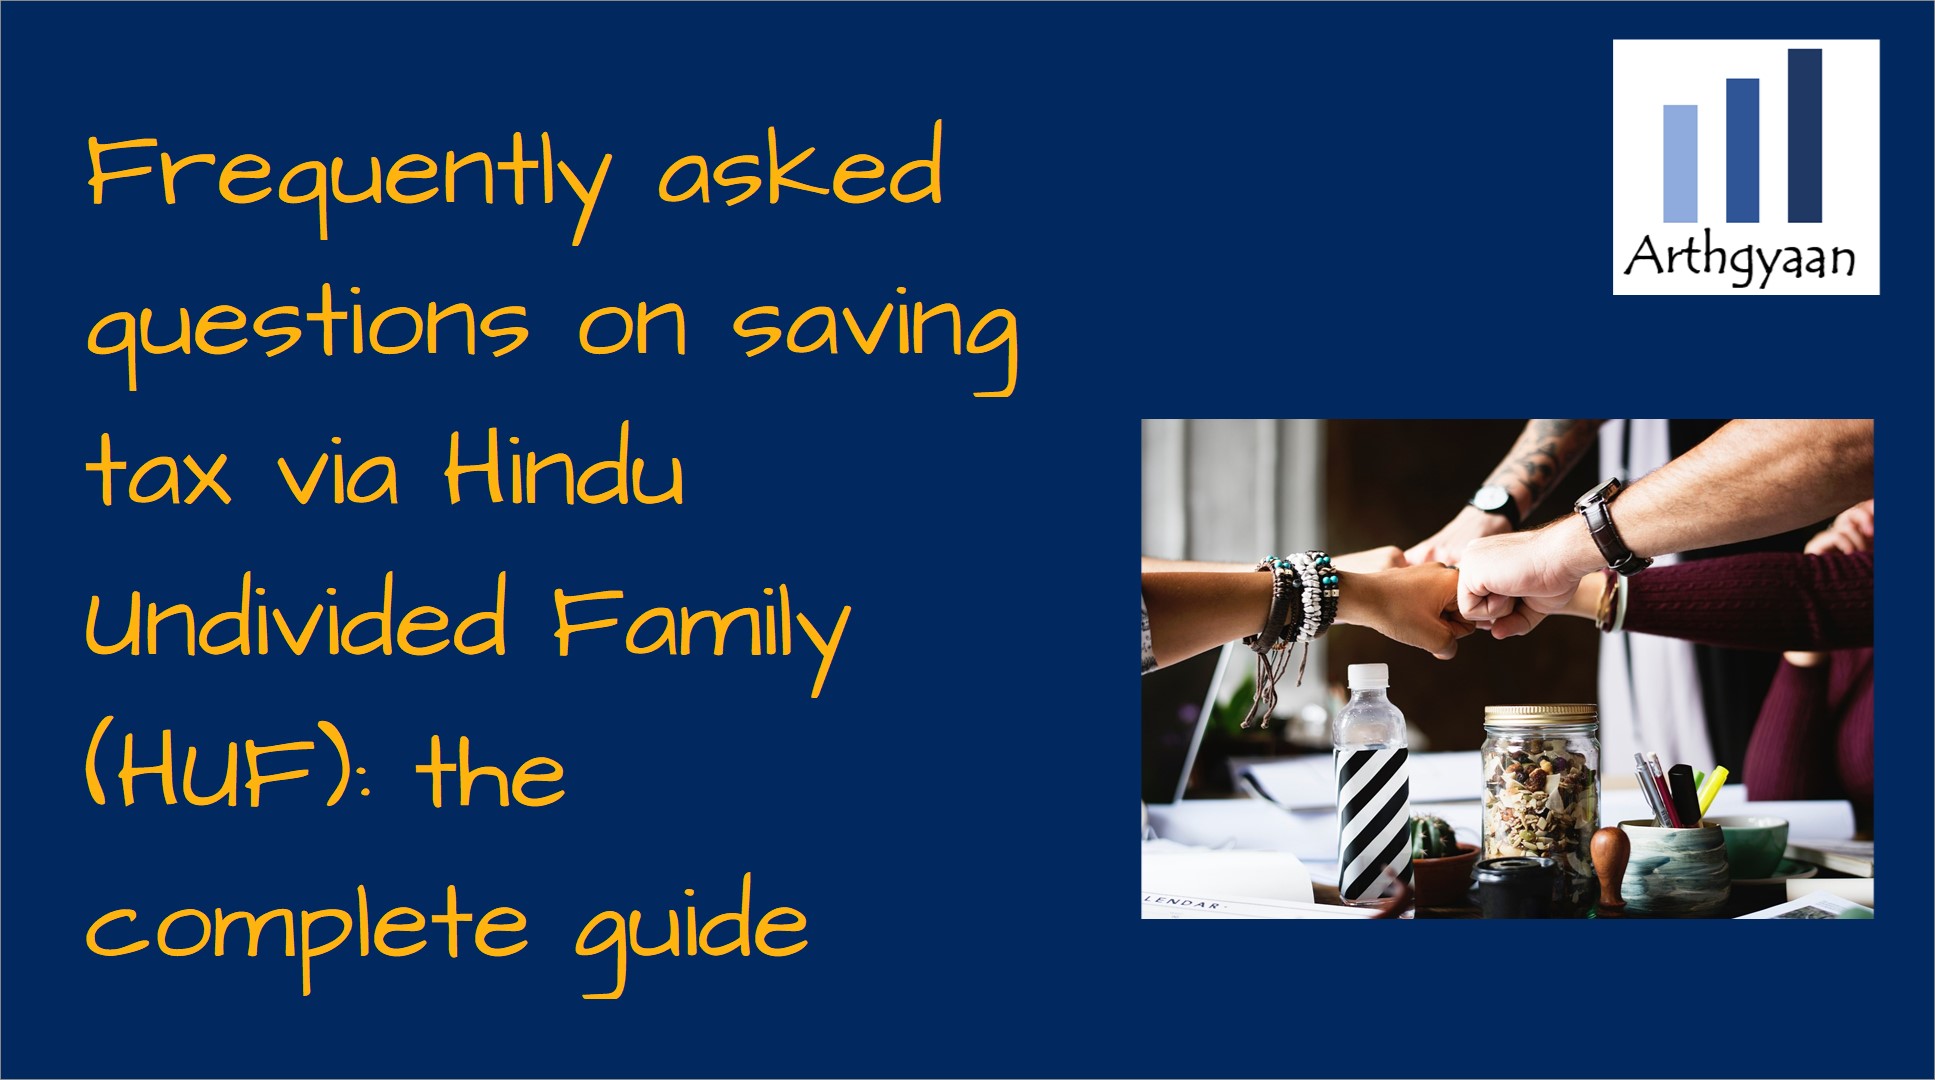 Frequently asked questions on saving tax via Hindu Undivided Family (HUF): the complete guide